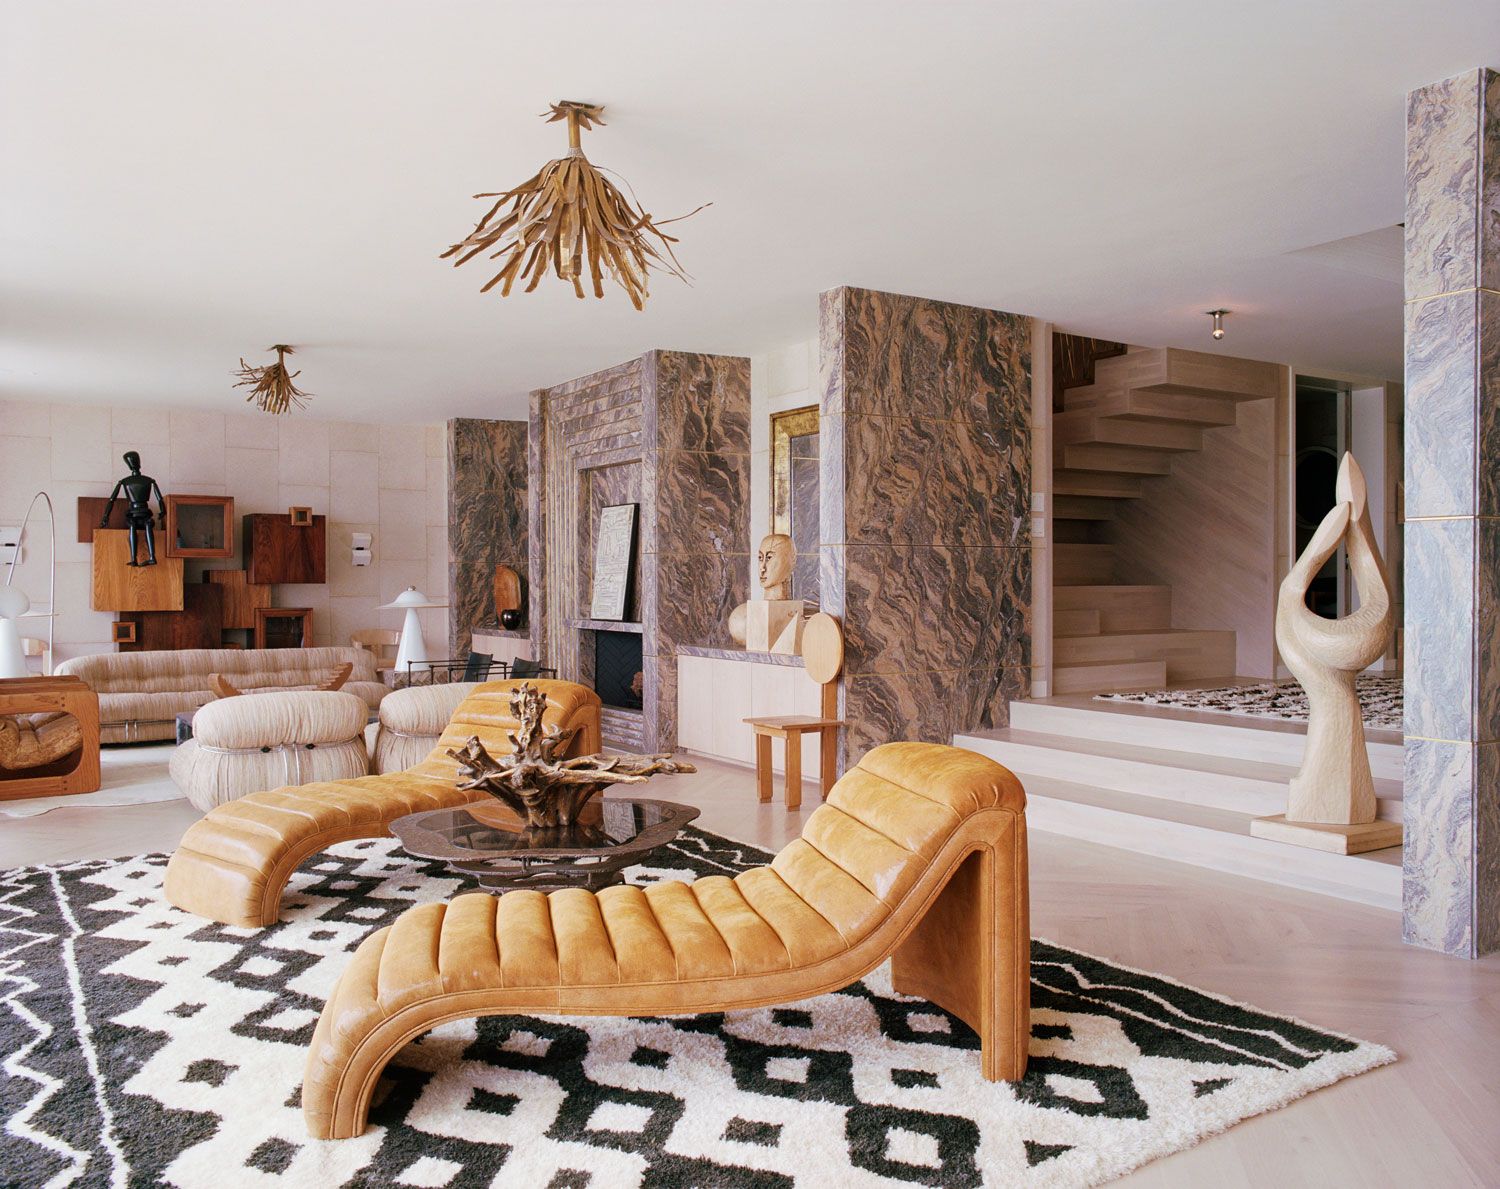 A Malibu living room designed by Kelly Wearstler features honed and leathered finishes on Bardiglio marble.